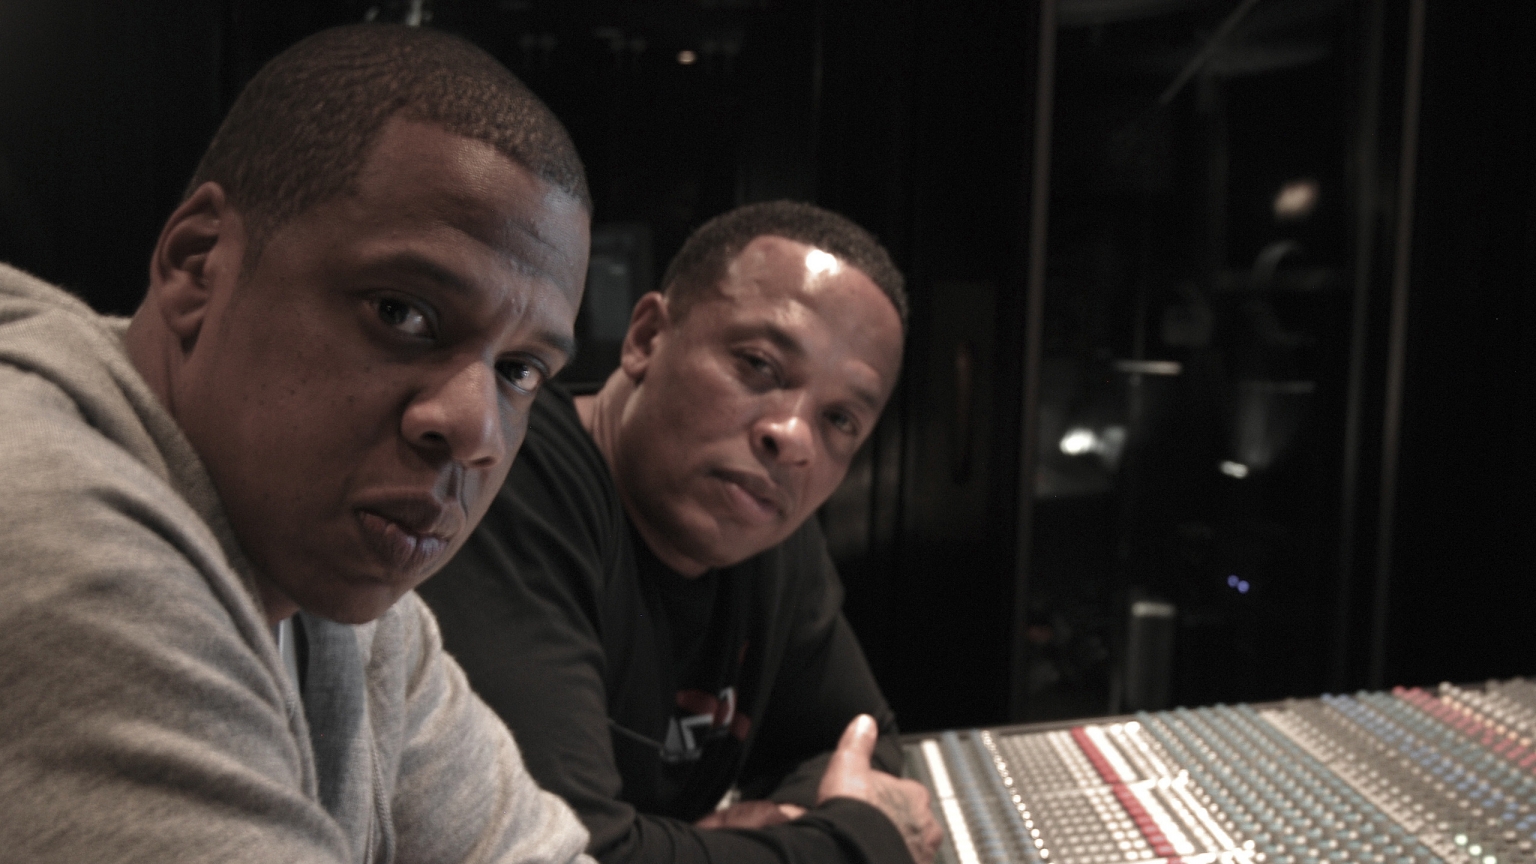 Jaz-Z and Dr Dre in Studio for 1536 x 864 HDTV resolution